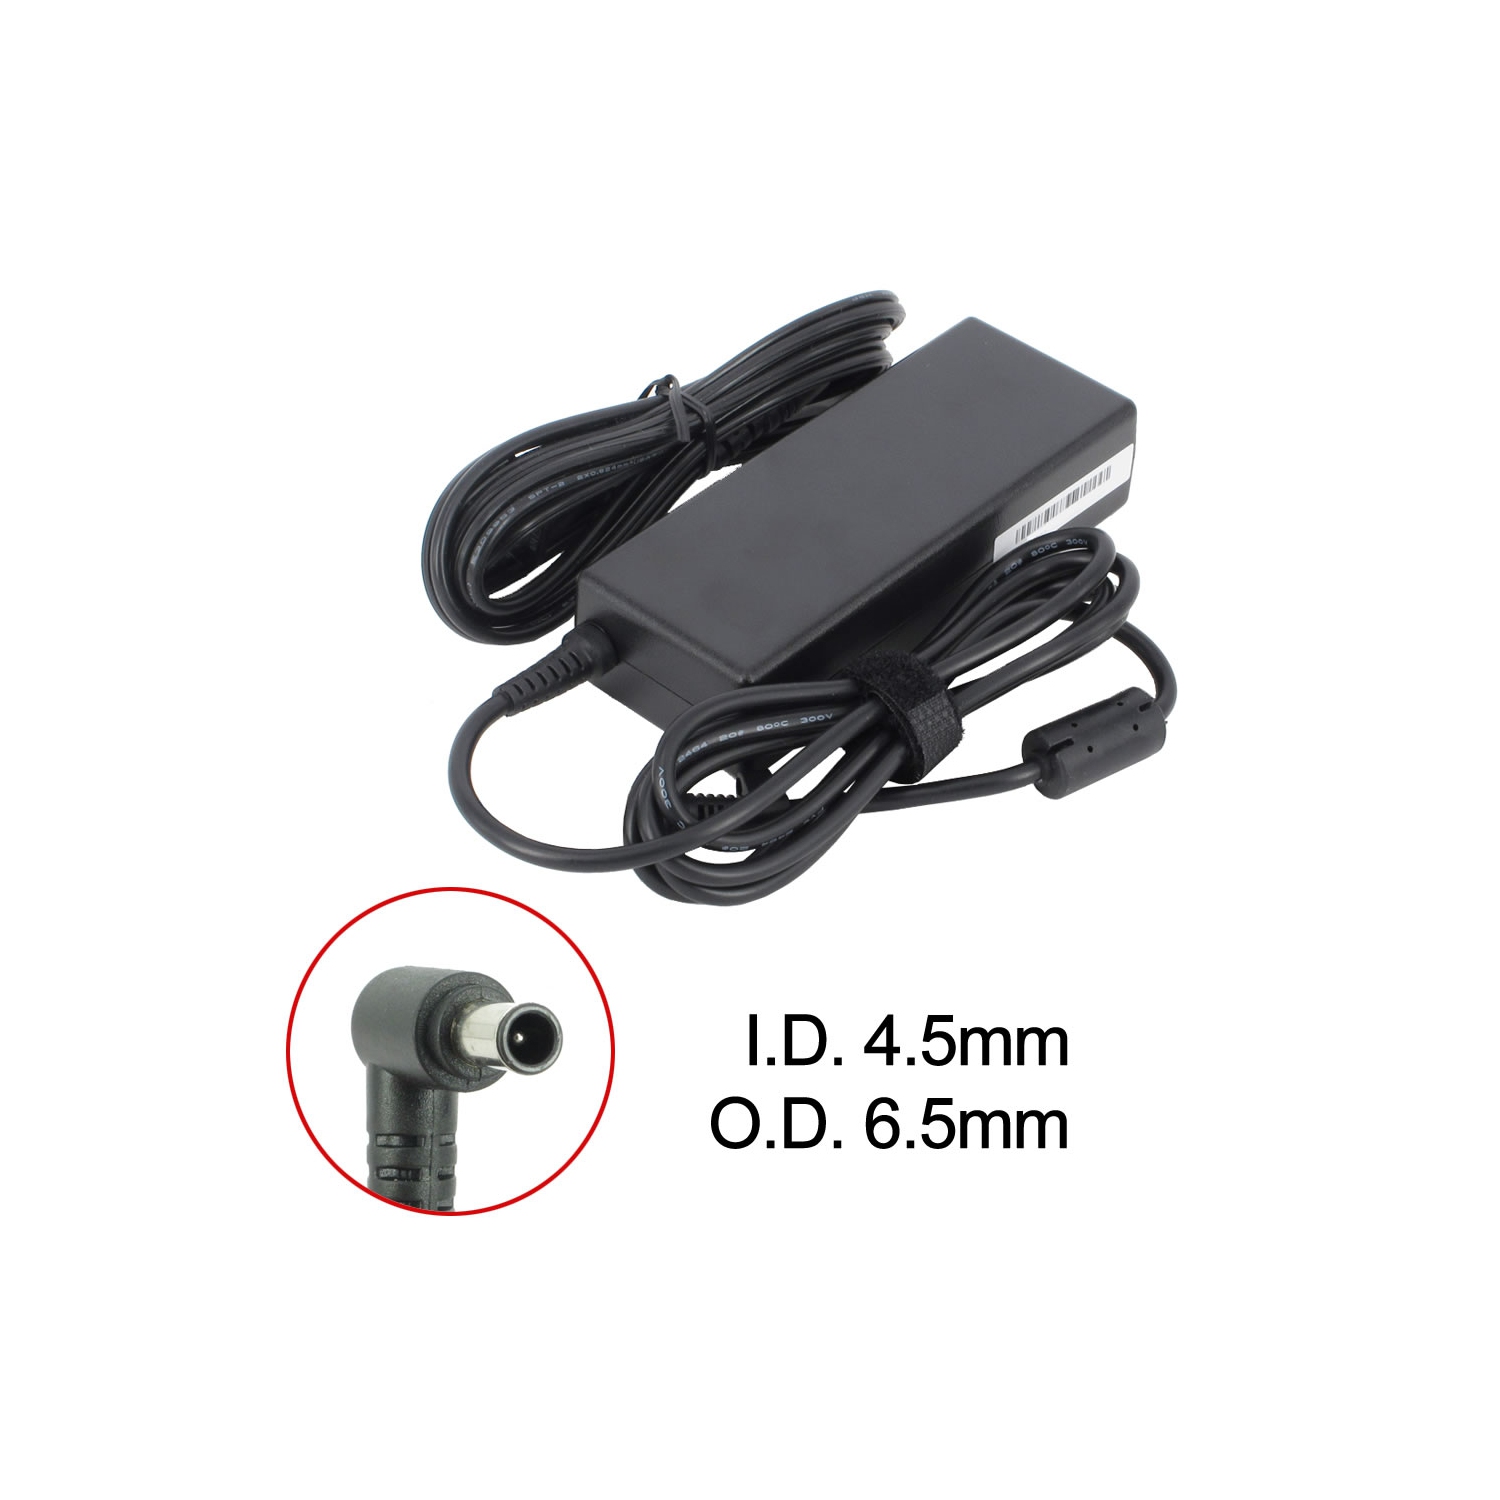 Brand New Laptop AC Adapter for Sony VAIO VGN-BX675 Series, PCGA-AC19V1, PCGA-AC19V23, VGP-AC19V19, VGP-AC19V27, VGP-AC19V48